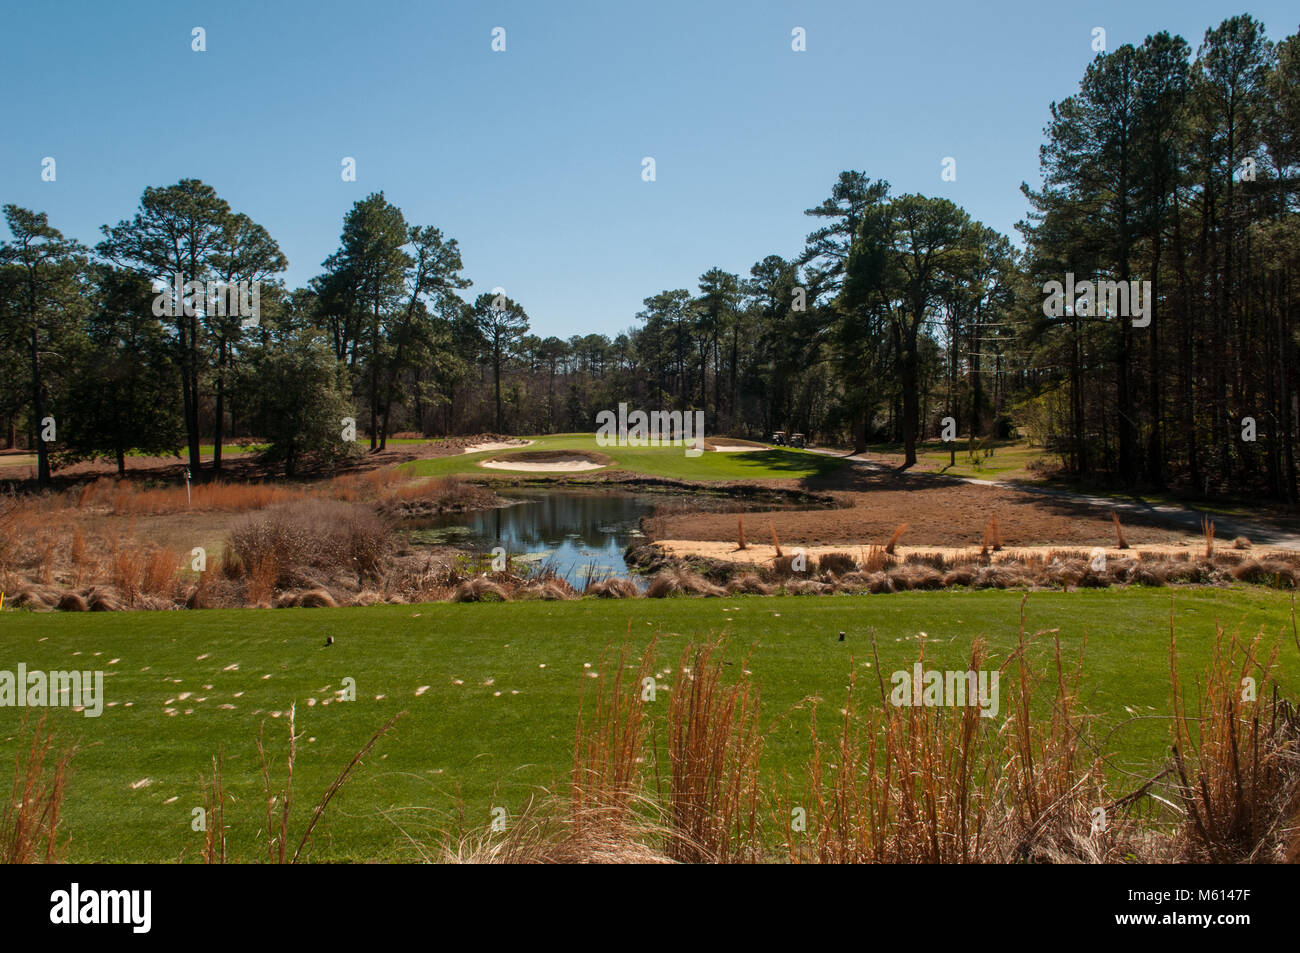 Southern Pines, North Carolina, USA. 27th Feb, 2018. Feb. 27, 2018 - SOUTHERN PINES, N.C., USA - The view from the 3rd tee of the Kyle Franz restored Donald Ross course at Pine Needles Lodge & Golf Club, site of the 2nd U.S. Senior Women's Open Championship, May 16-19, 2019 and the U.S. Women's Open, June 2-5, 2022 at Pine Needles Lodge & Golf Club. The 2019 event will mark the club's sixth USGA championship, the fourth U.S. Women's Open, and the first since the 2007 U.S. Women's Open won by Cristie Kerr. Credit: Timothy L. Hale/ZUMA Wire/Alamy Live News Stock Photo